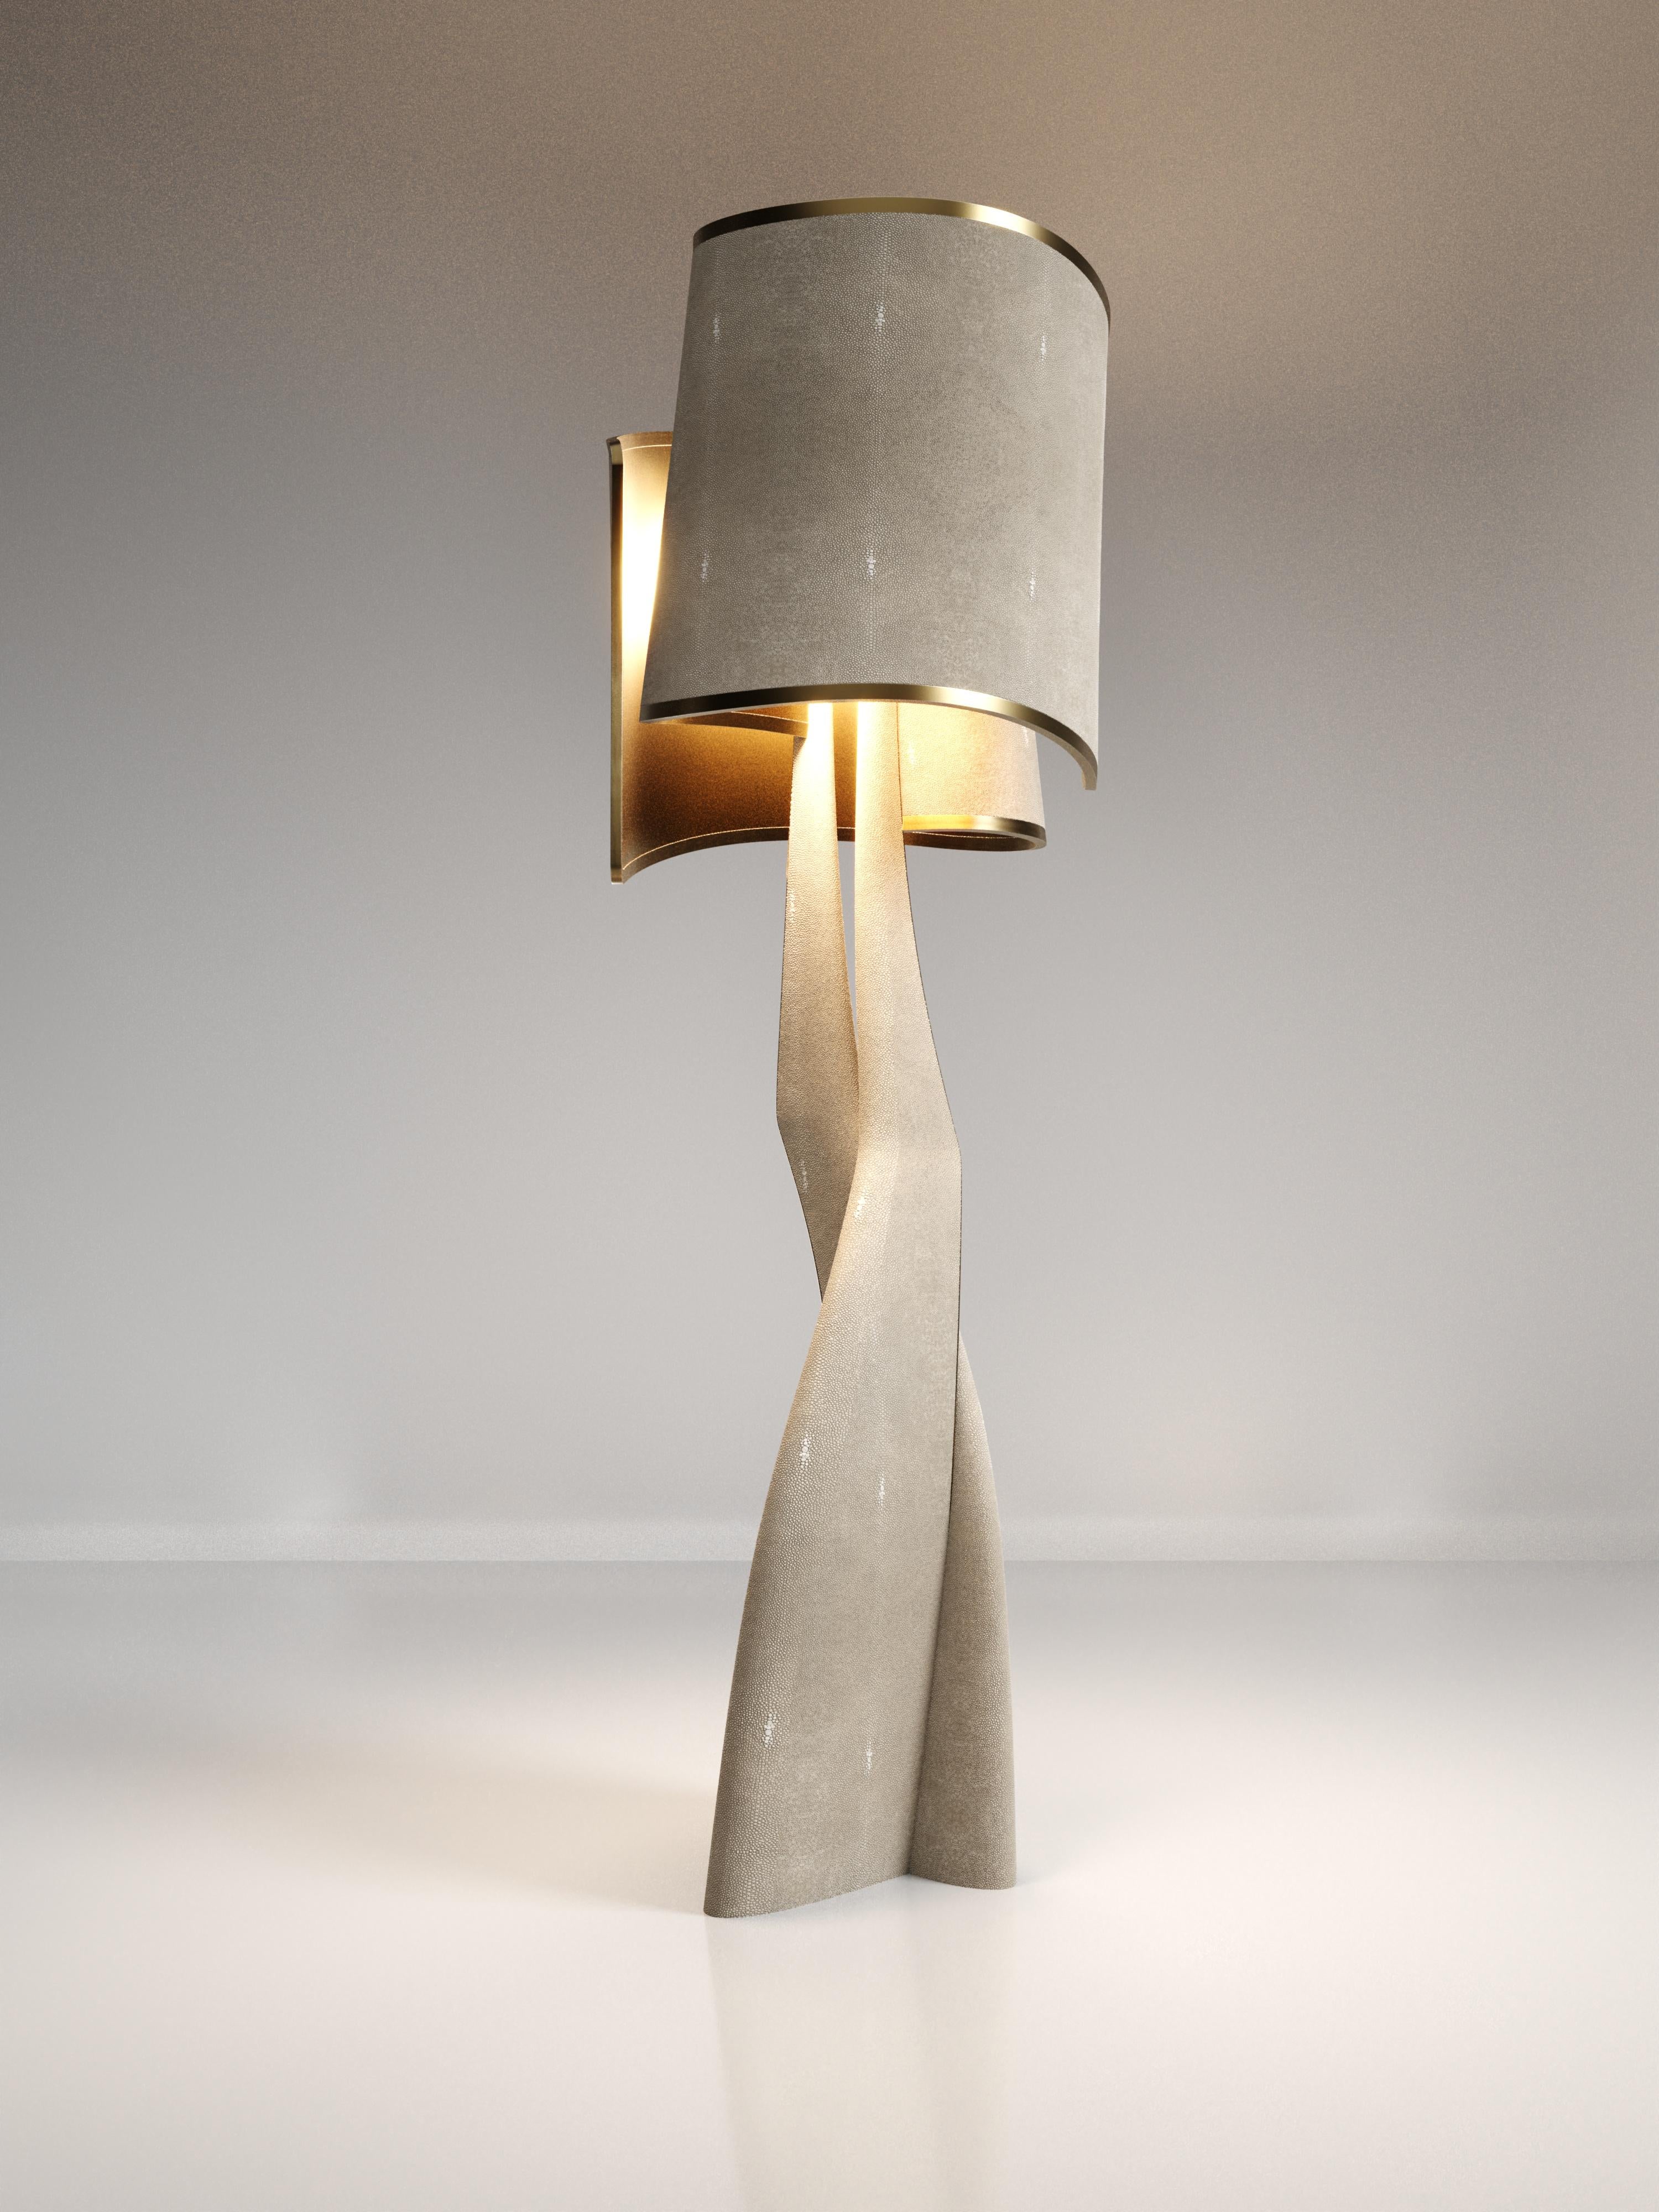 The Chital III Floor Lamp by Kifu Paris is a sleek and sculptural piece, inlaid in a mixture of bronze-patina brass and cream shagreen. The chiseled legs, which are an iconic shape within the KIFU PARIS universe, morph into the solid shades that